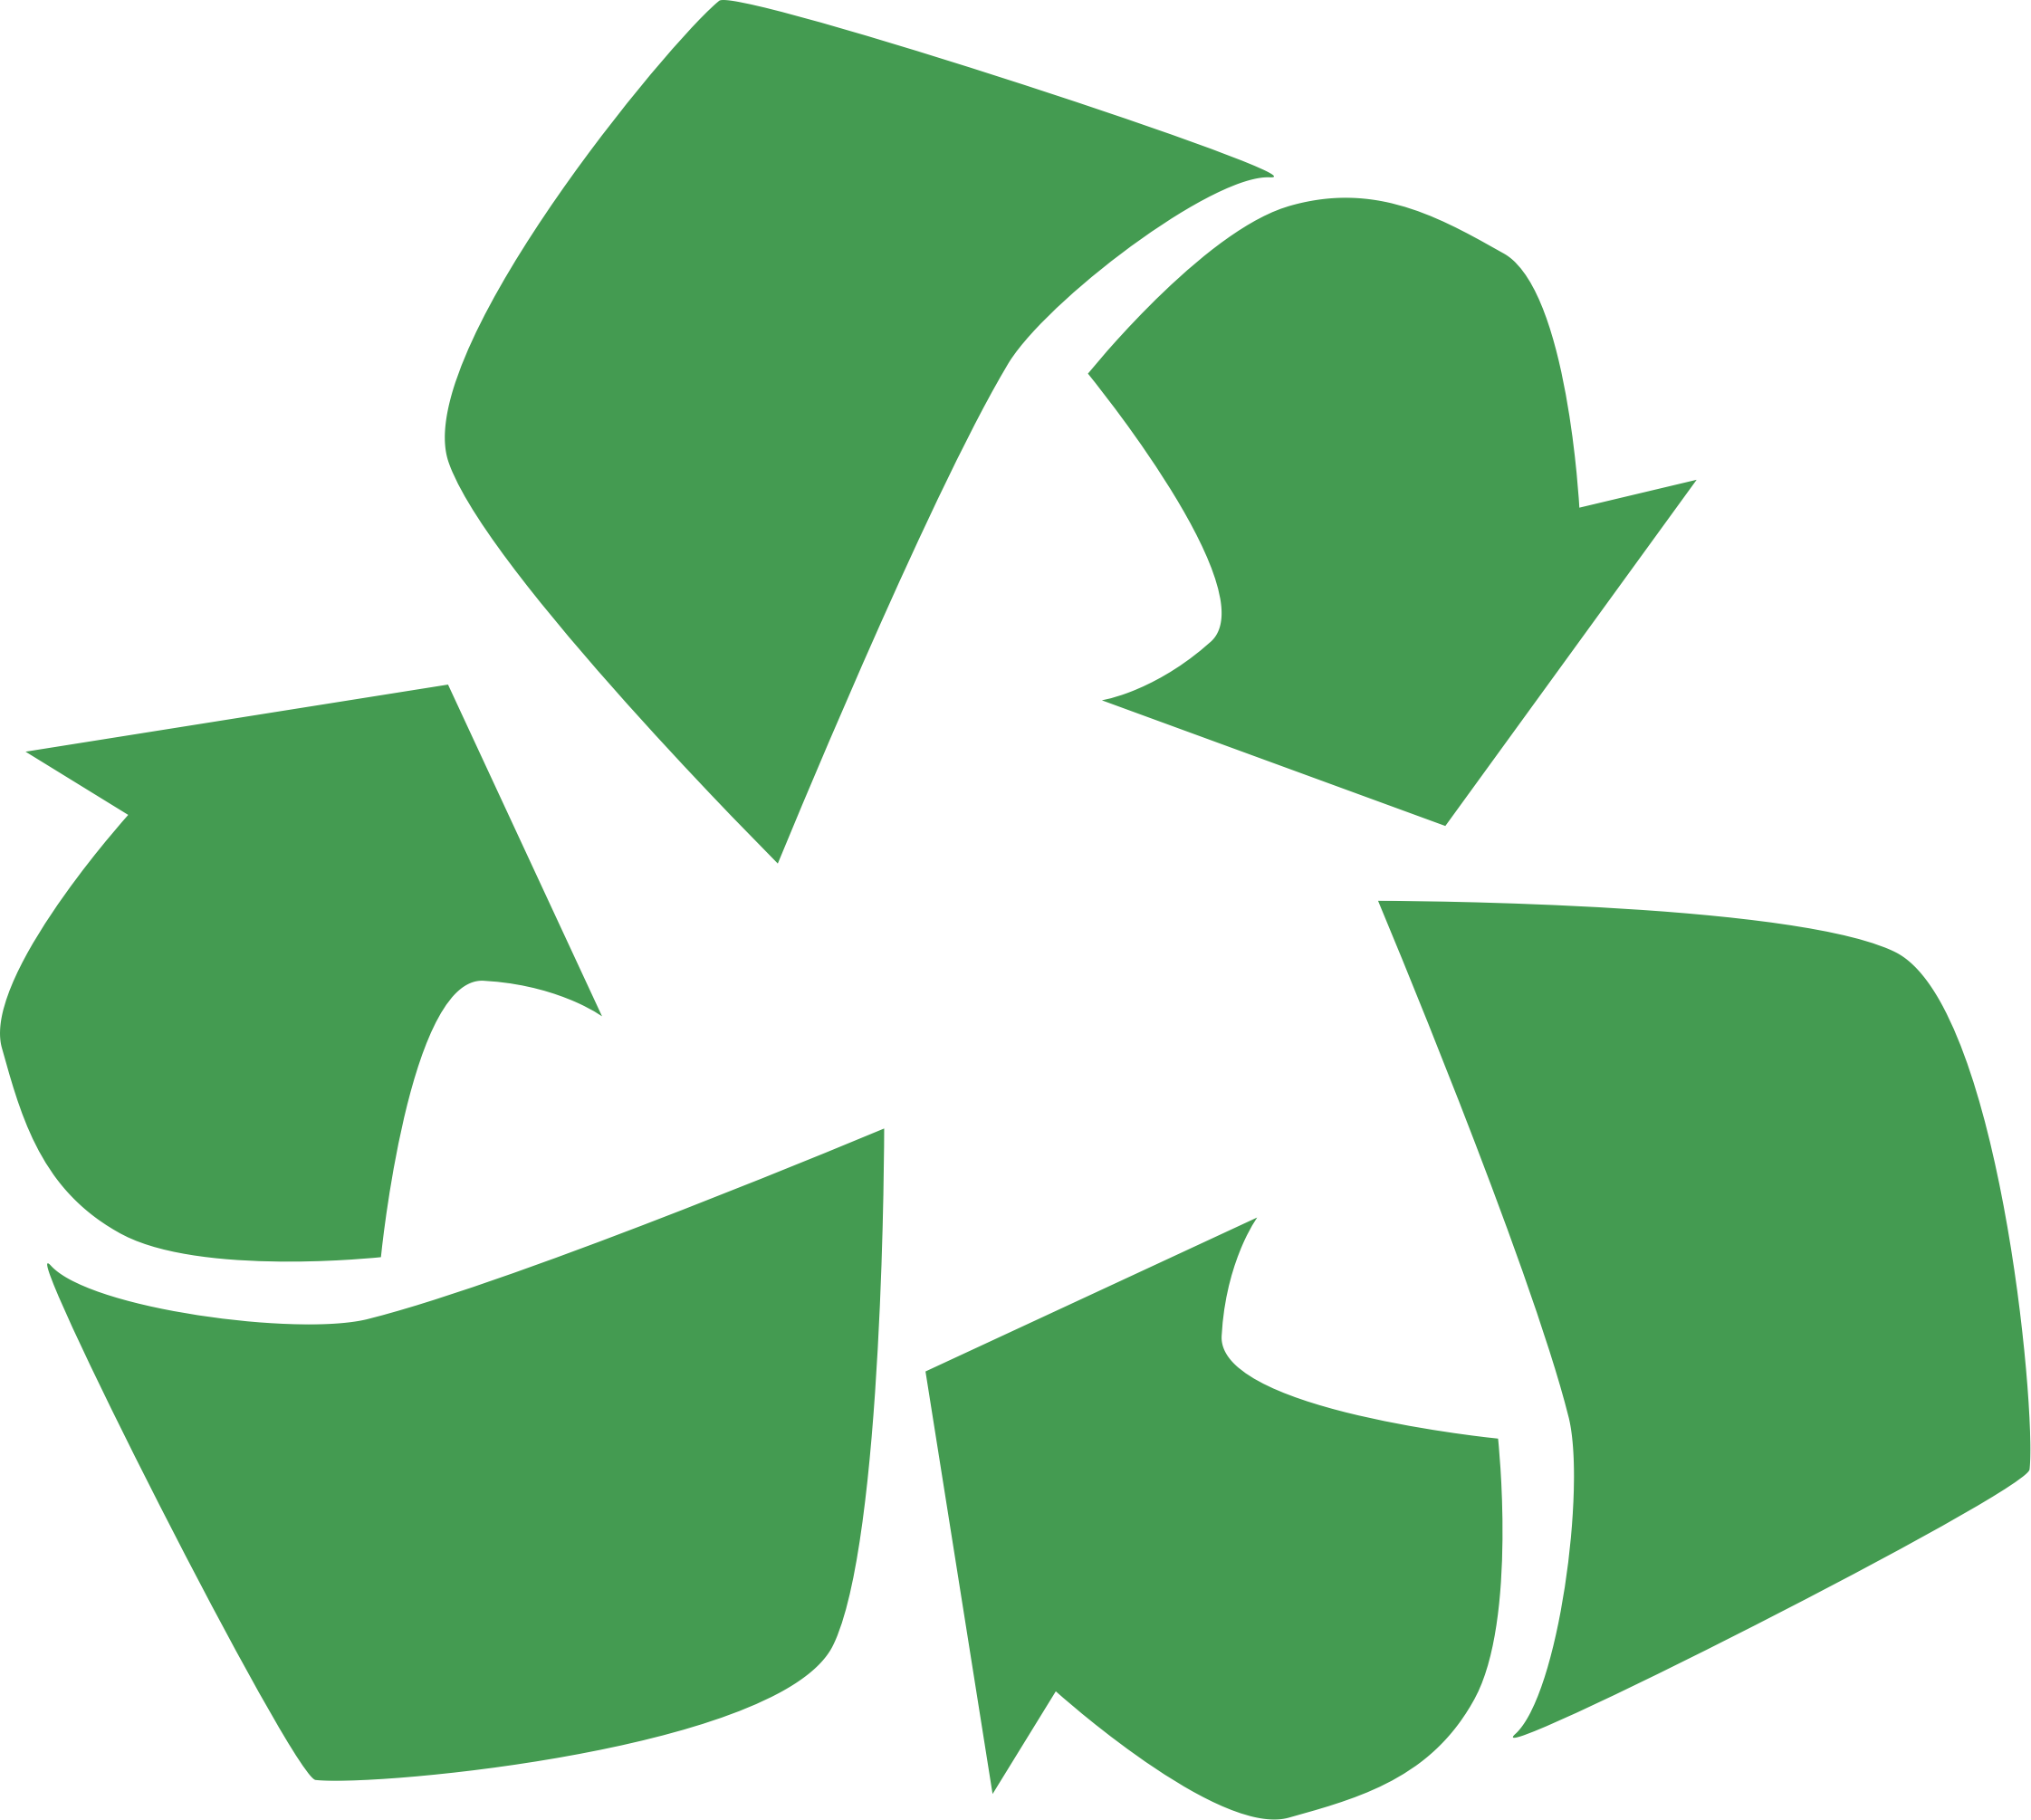 Clipart - Recycle Symbol